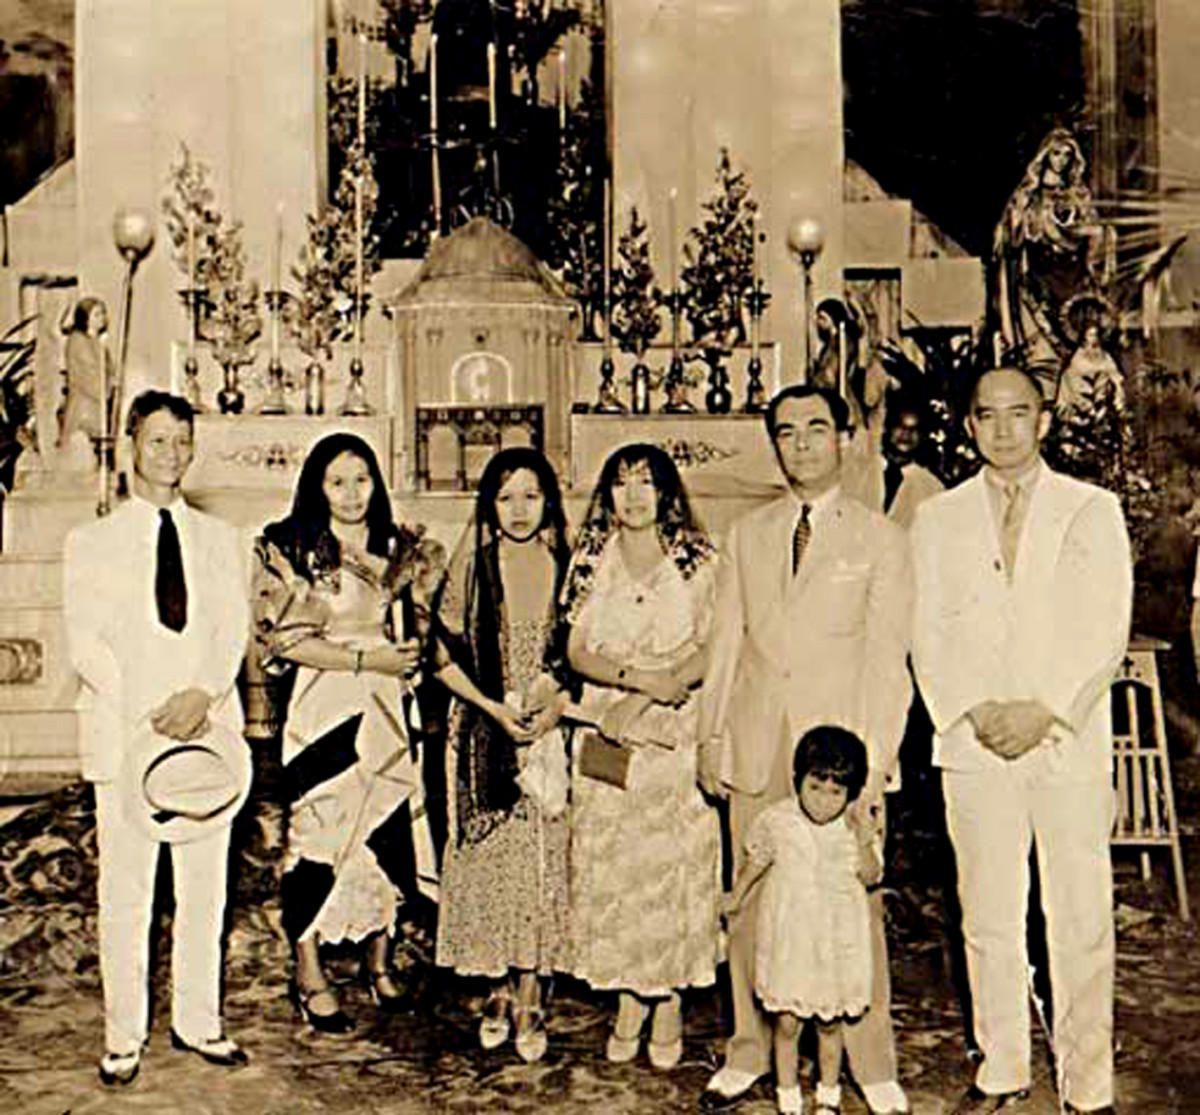 At the baptism of my aunt Aurora. President Quezon, second on right, was a school friend of my grandfather before he went into office.